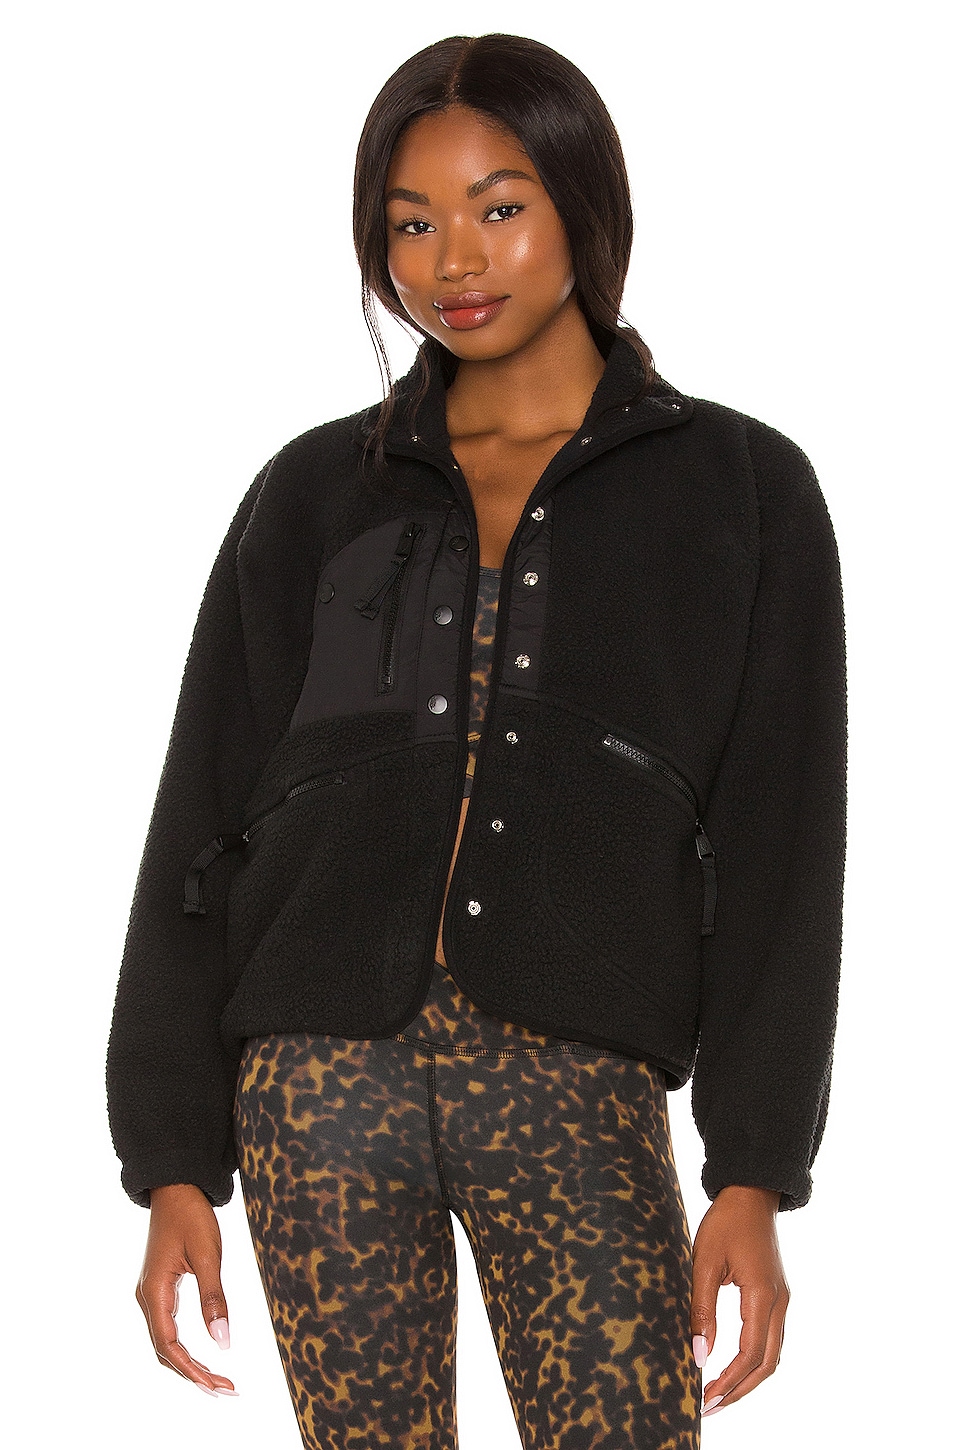 Free People X FP Movement Hit The Slopes Jacket in Black